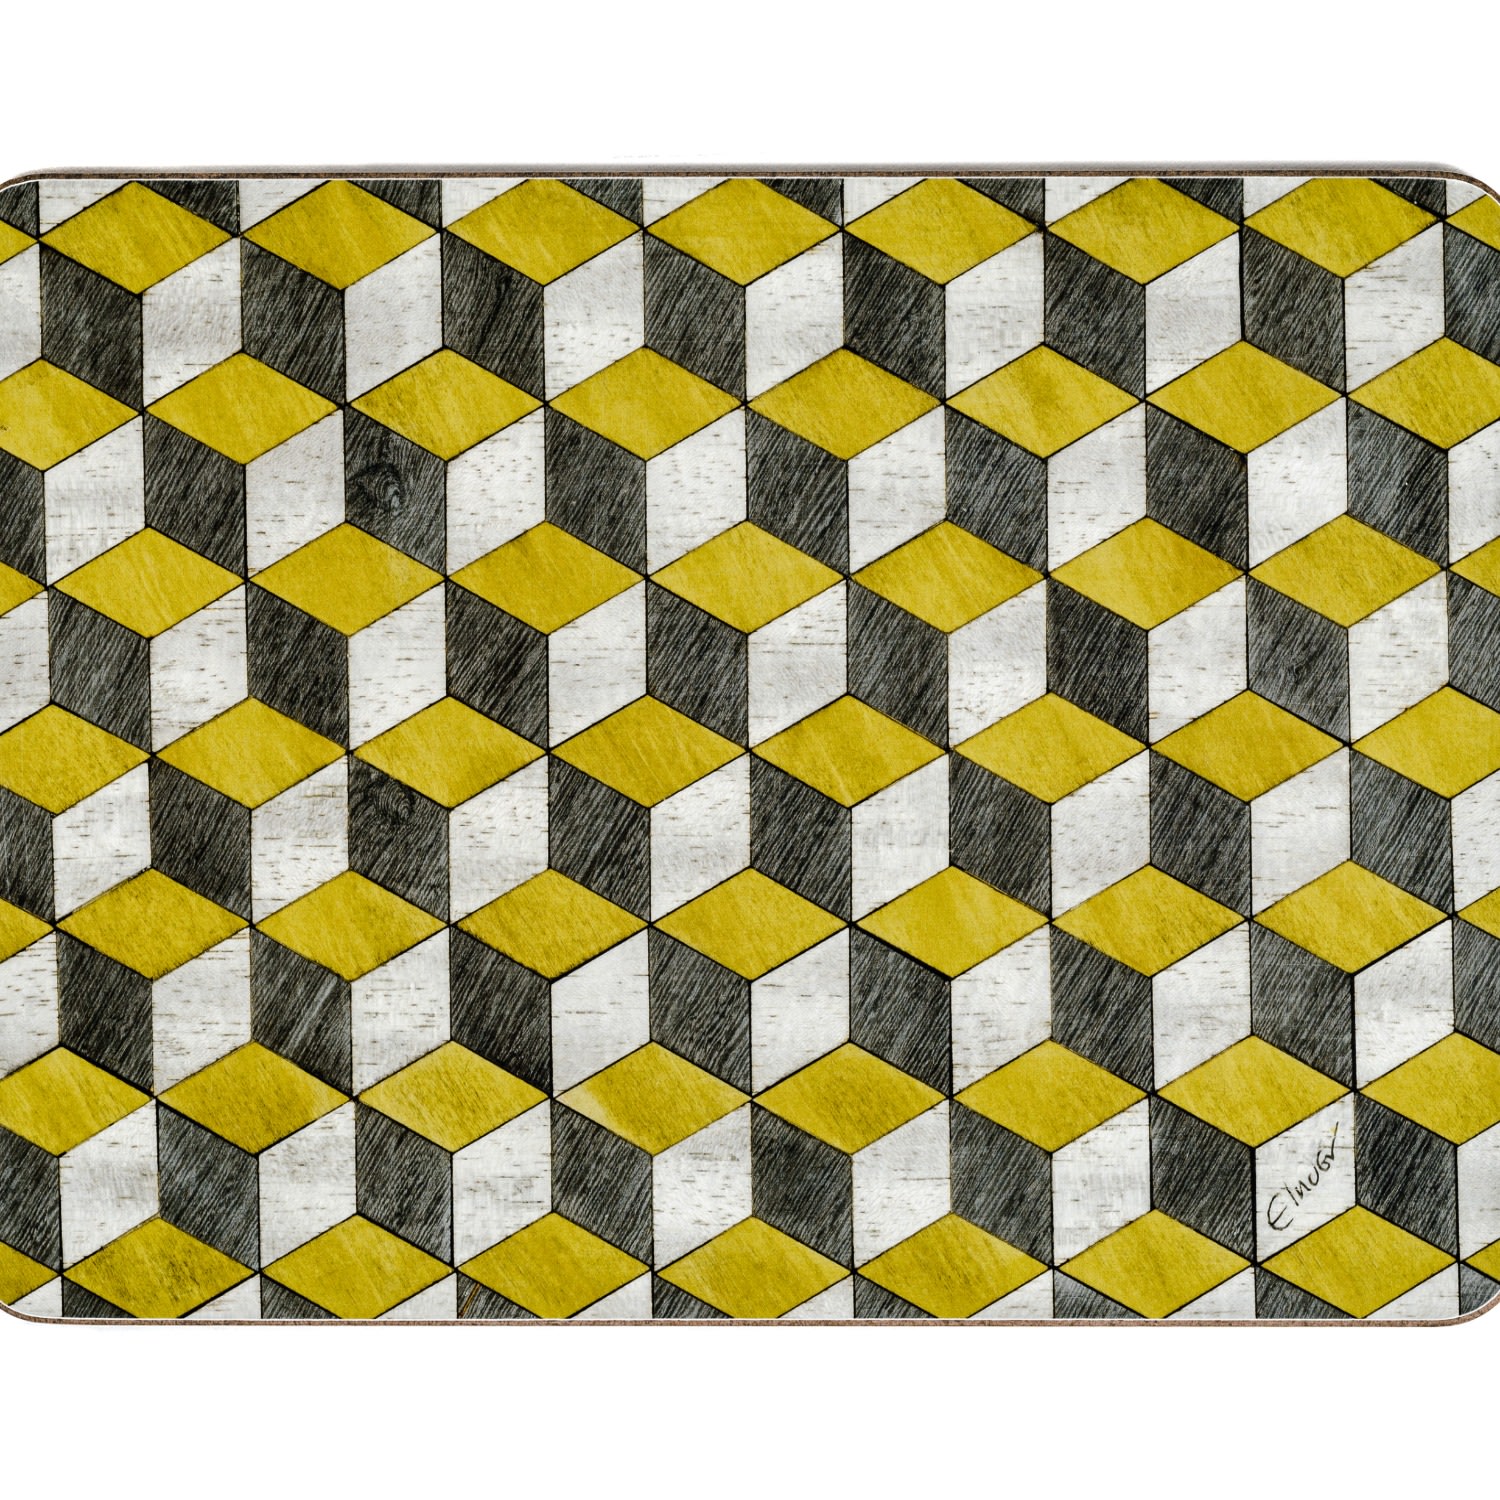 Grey / Yellow / Orange Four Large Placemats In Retro Style Geometric Design In Yellow And Greys With Heat Resistant Melamine Coating. E. Inder Designs